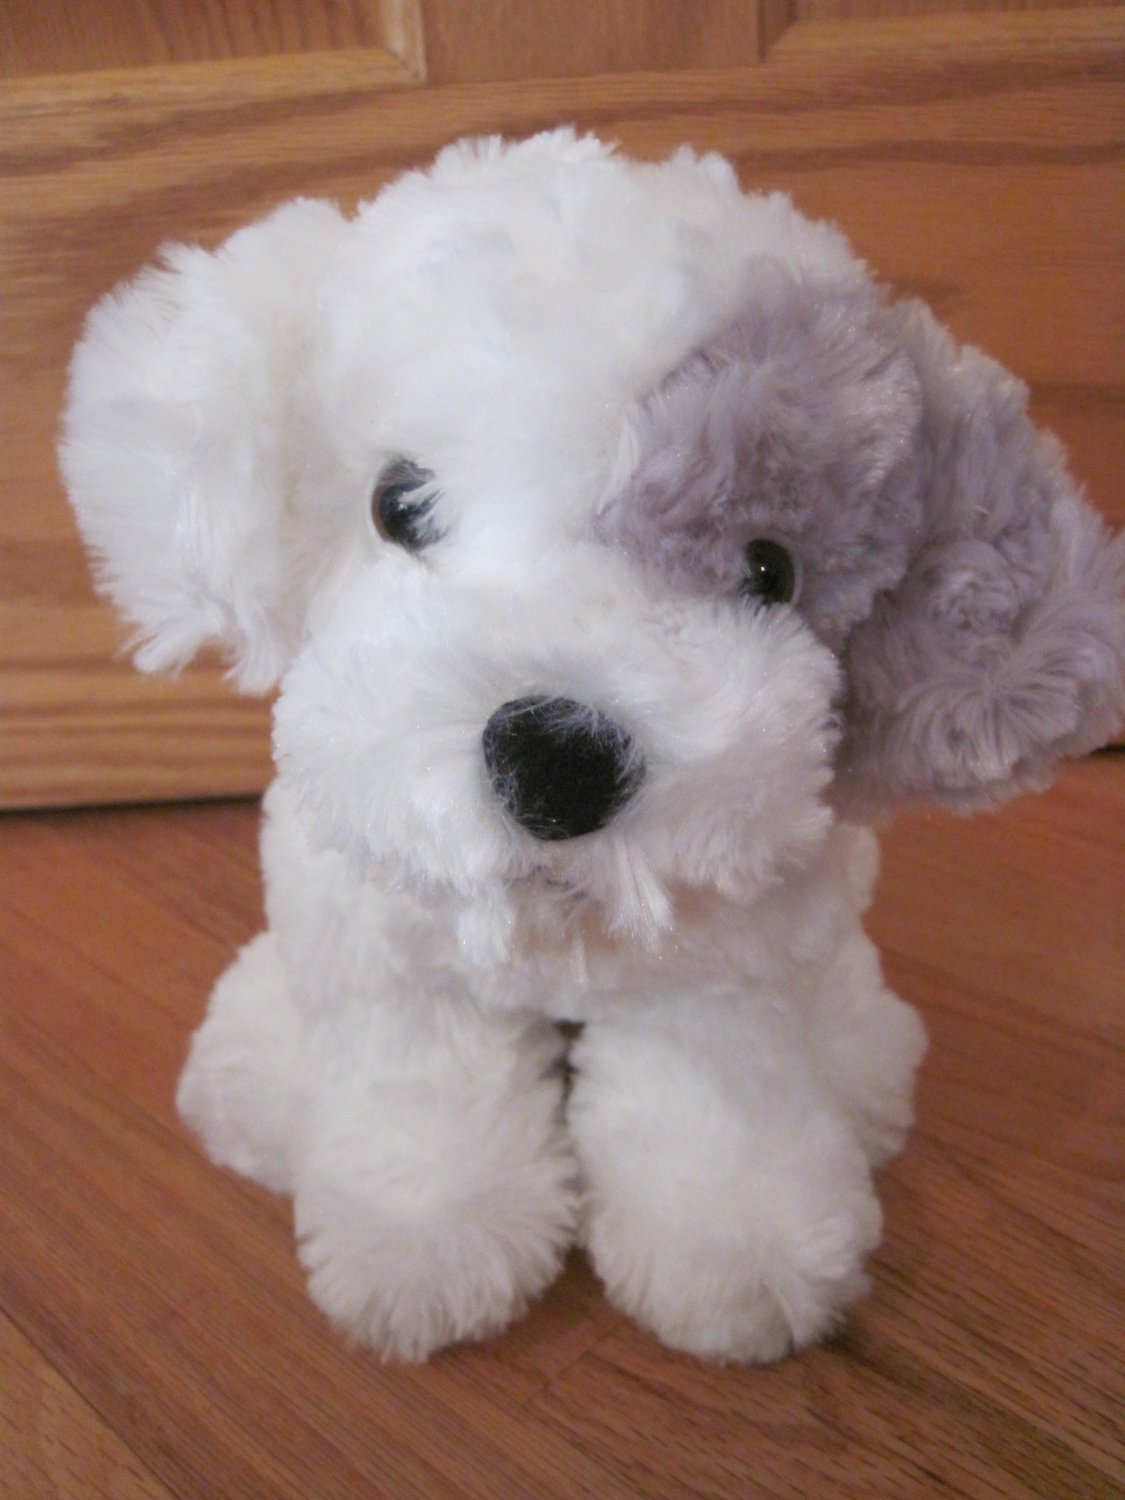 best made toys plush puppy